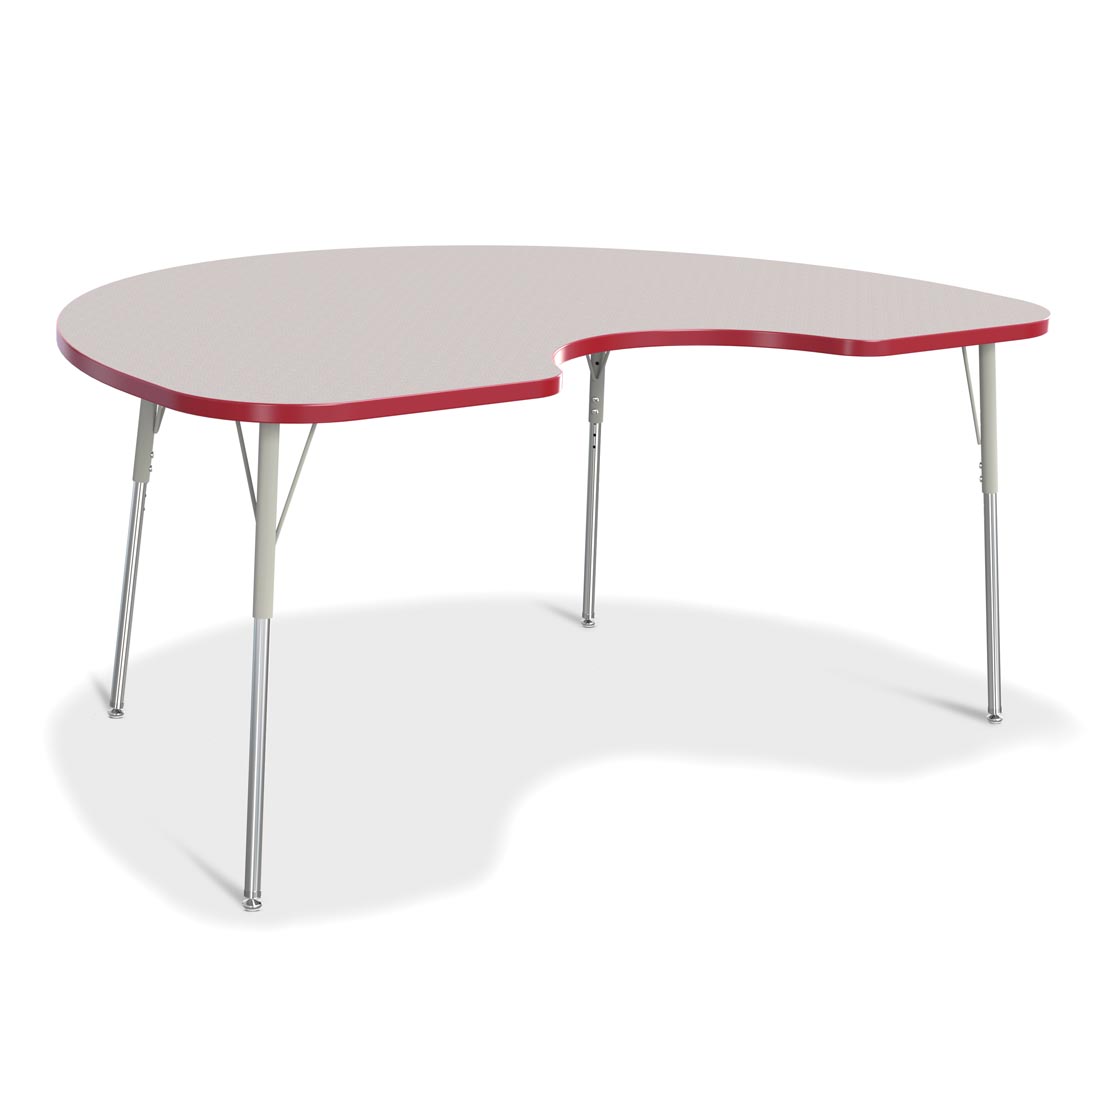 Berries Kidney Activity Table Adult Height Gray With Red Edge